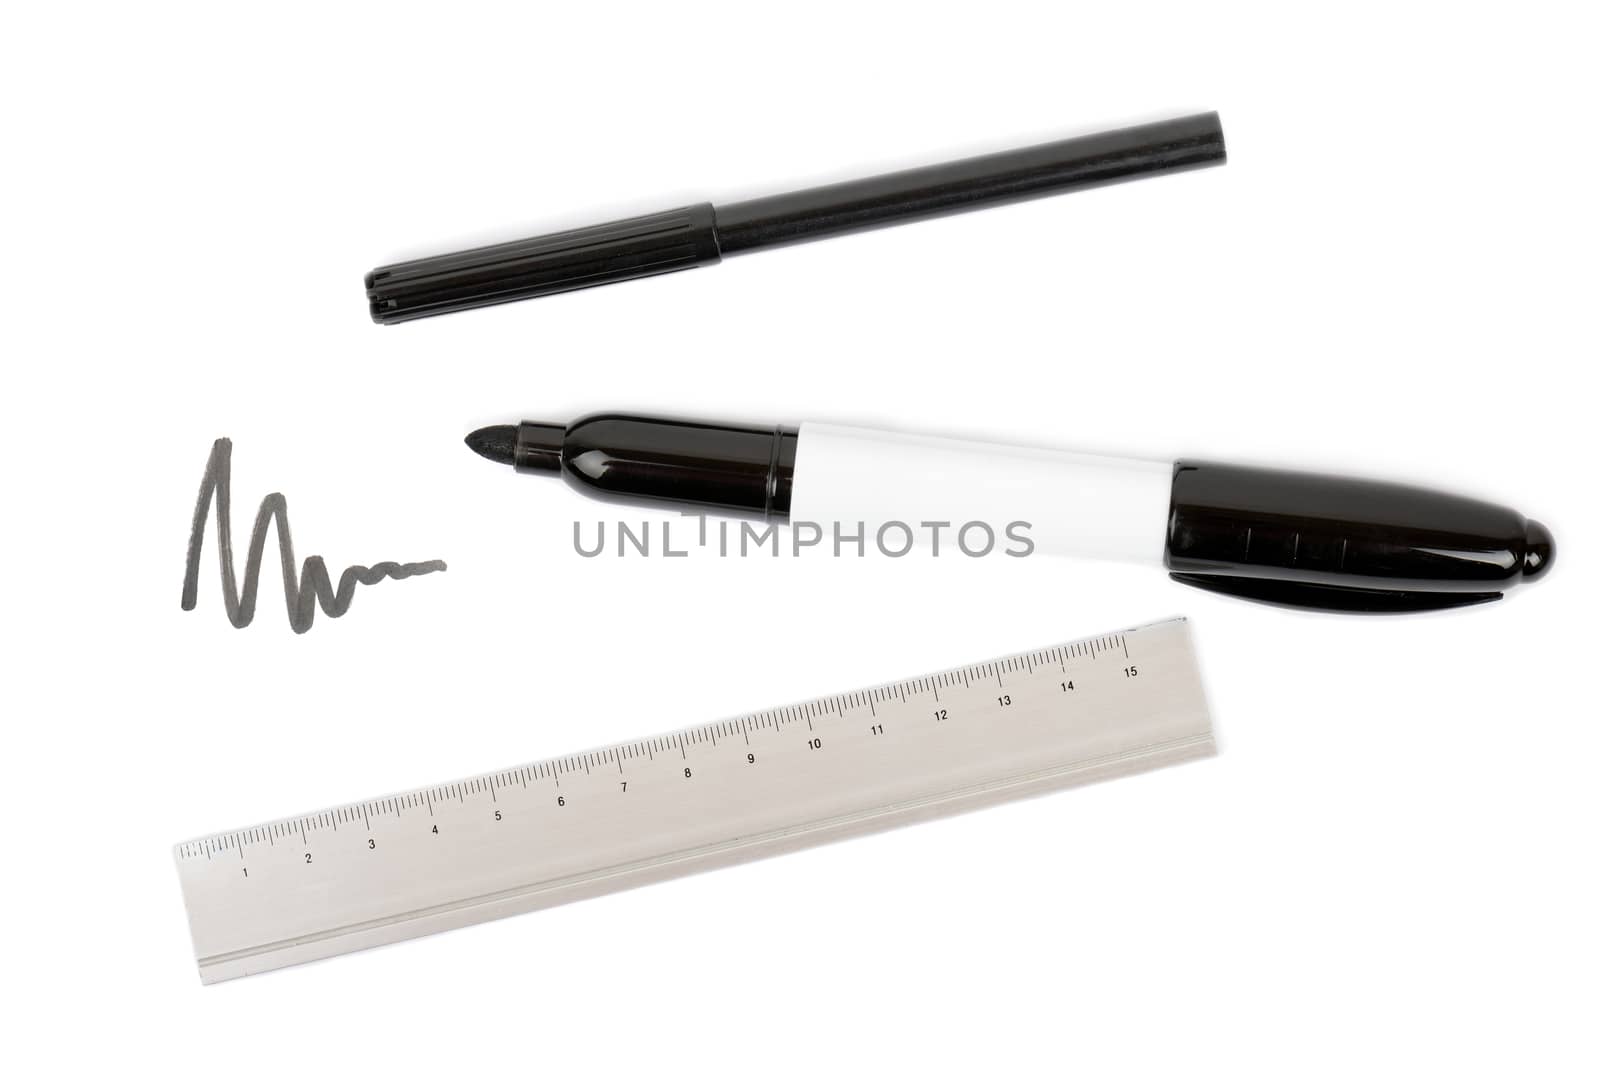 drawing equipmet pens and a ruler on a white background